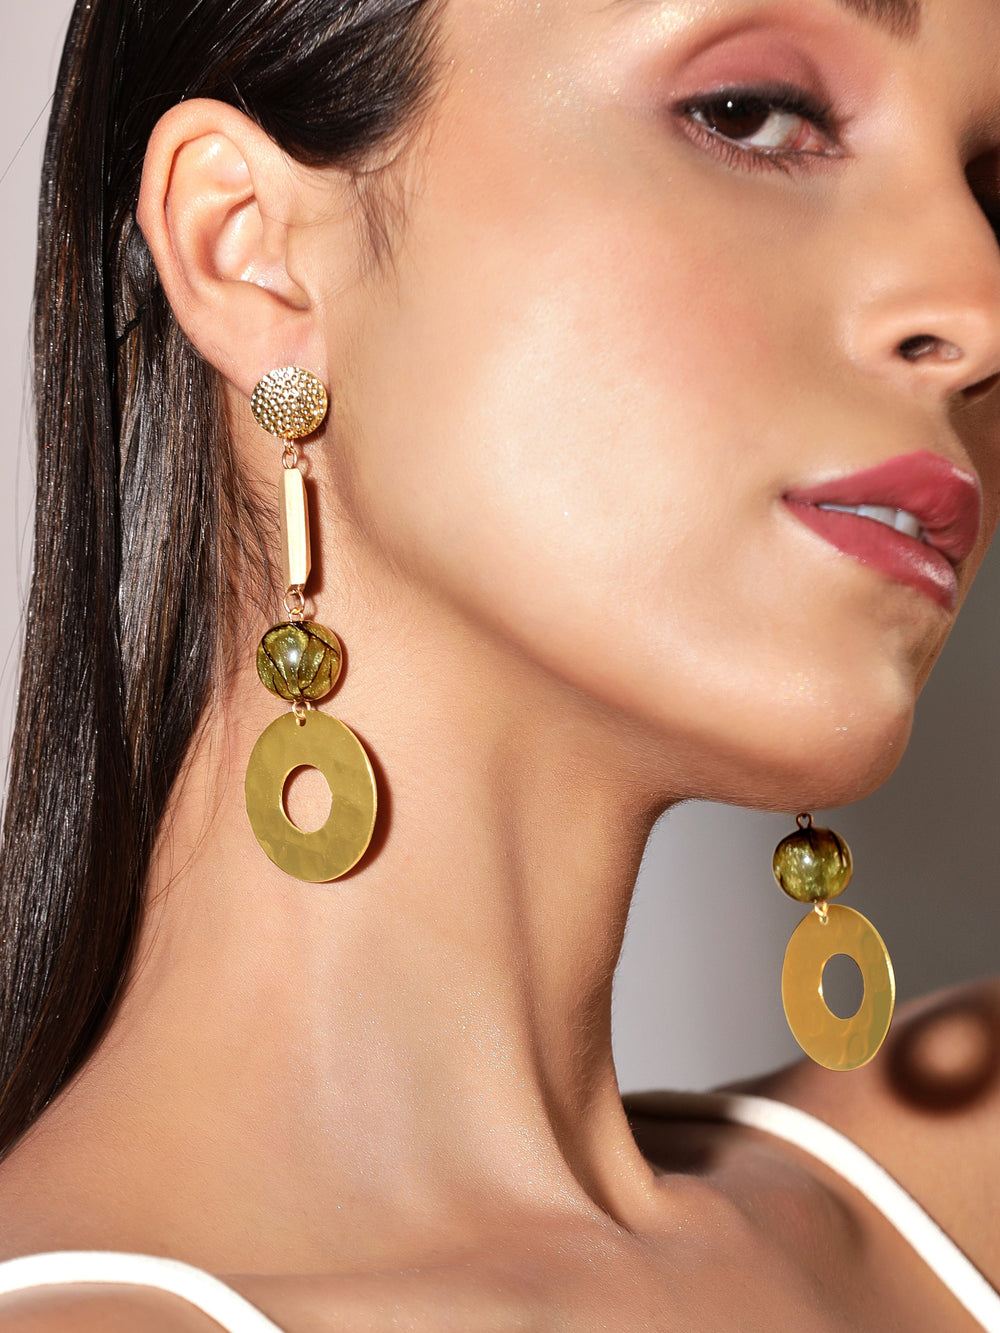 Rubans Voguish Western Drop Earrings With Olive Green And Wooden Beads Earrings